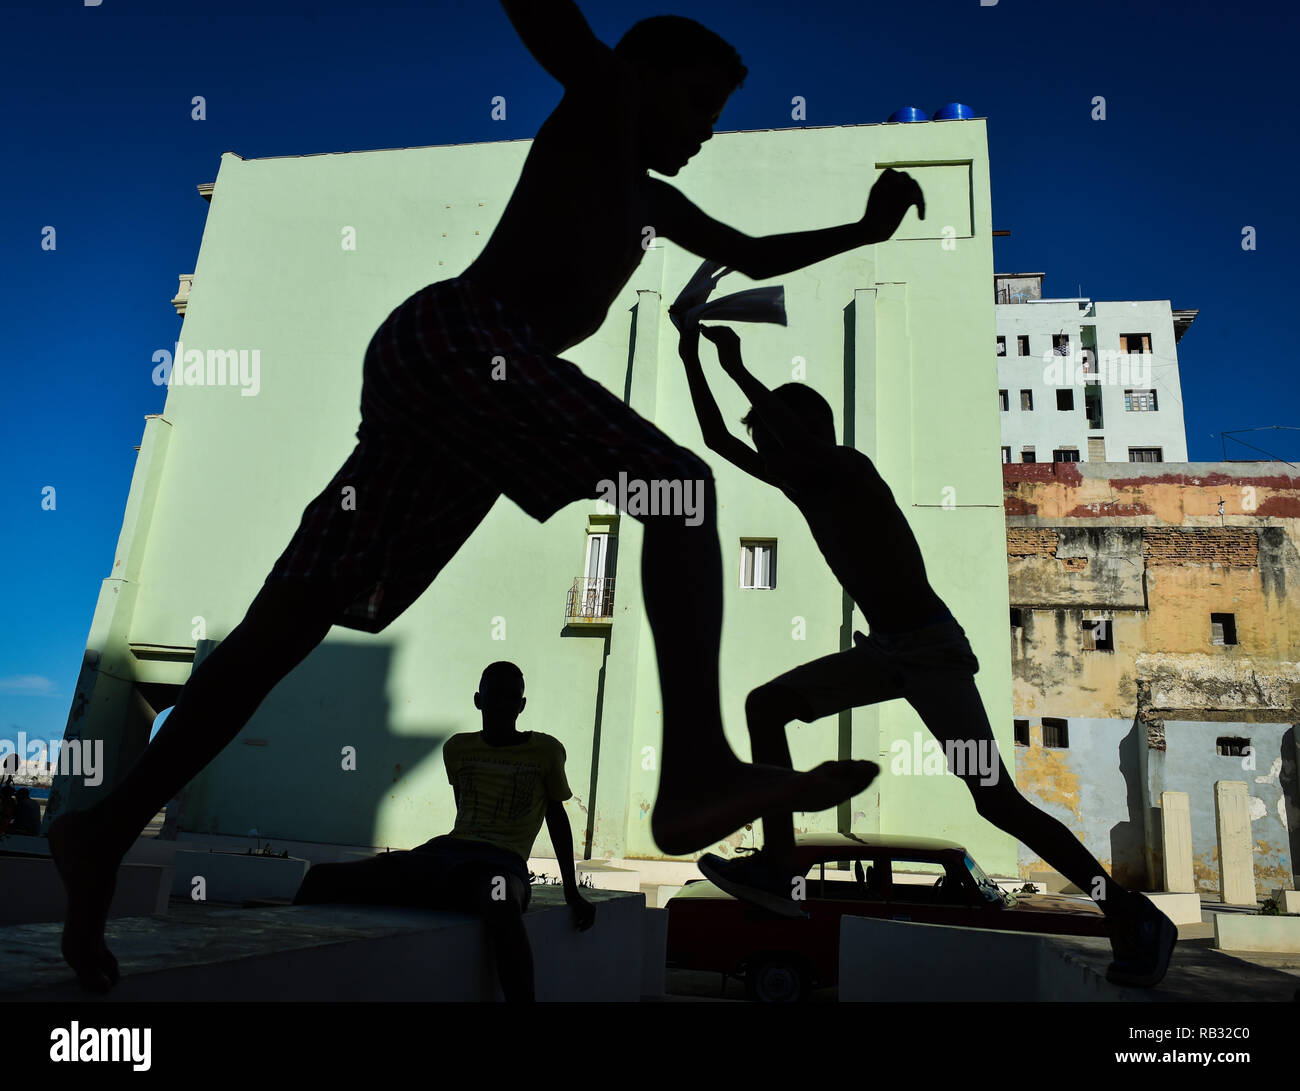 Havana, Havana, Cuba. 11th Oct, 2018. Silhouettes of young boxers seen training at the Rafael Trejo training camp in Havana, Cuba.Cuban boxers are the most successful in the history of amateur boxing, Cuba has won 32 Olympic boxing gold medals since 1972, .In 1962, professional boxing in Cuba was banned by Fidel Castro. As a consequence of Castro's ban, if fighters want to pursue their dream of becoming world champions they have to make the heartbreaking decision to defect from the country and It can be very tough for them because they are excommunicated and separated from their families. Stock Photo